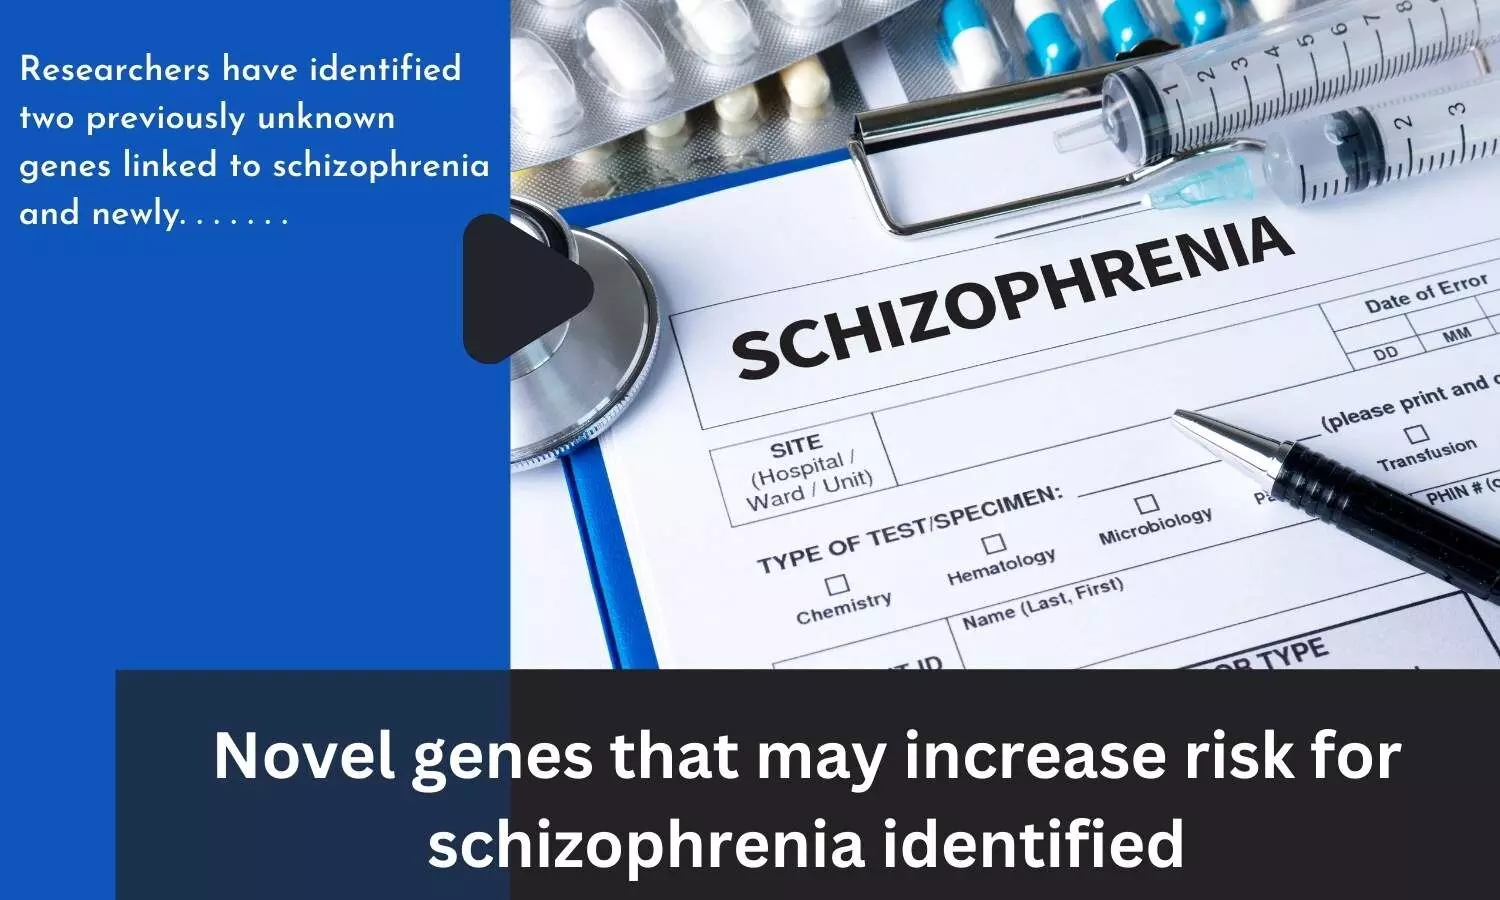 Novel genes that may increase risk for schizophrenia identified